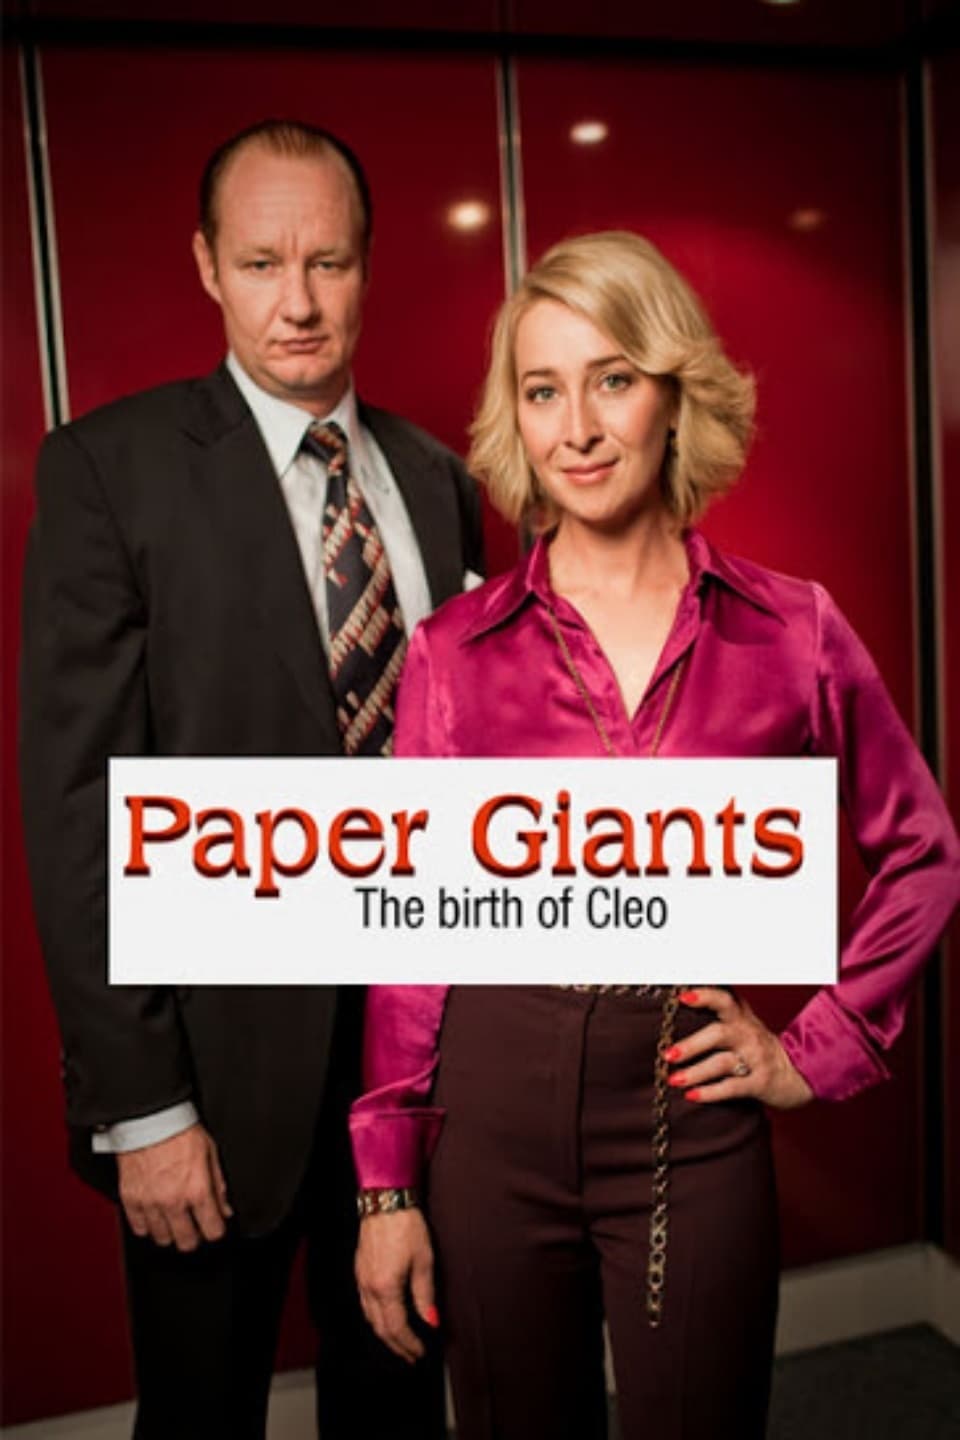 Paper Giants: The Birth of Cleo TV Shows About Media Tycoon